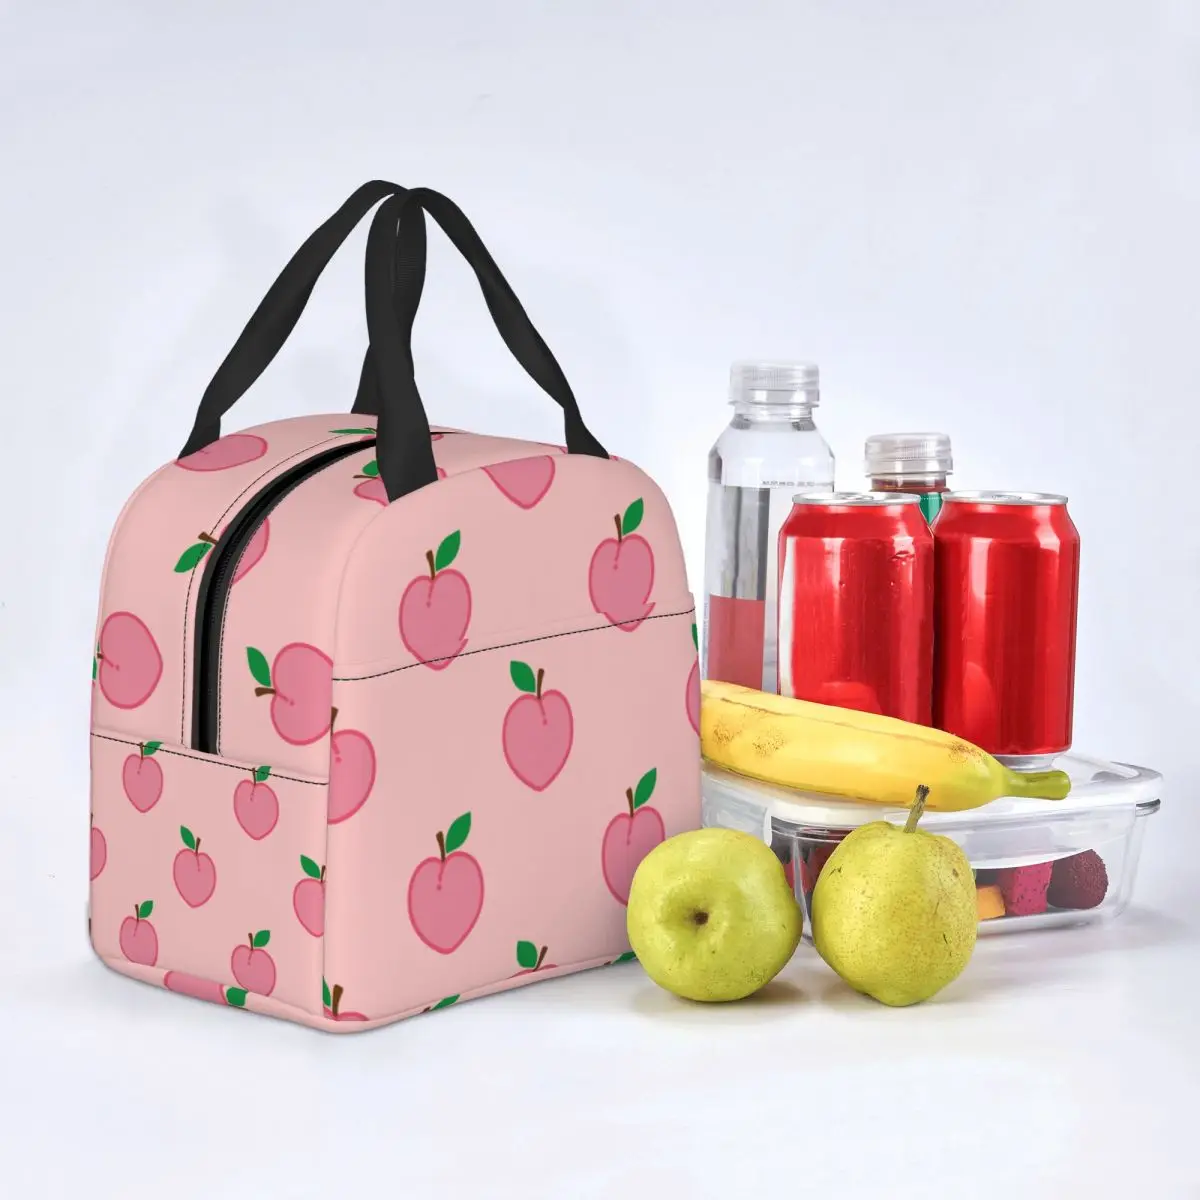 Pink Peach Lunch Bags Waterproof Insulated Oxford Cooler Bags Fruit Thermal Cold Food Picnic Work Lunch Box for Women Girl